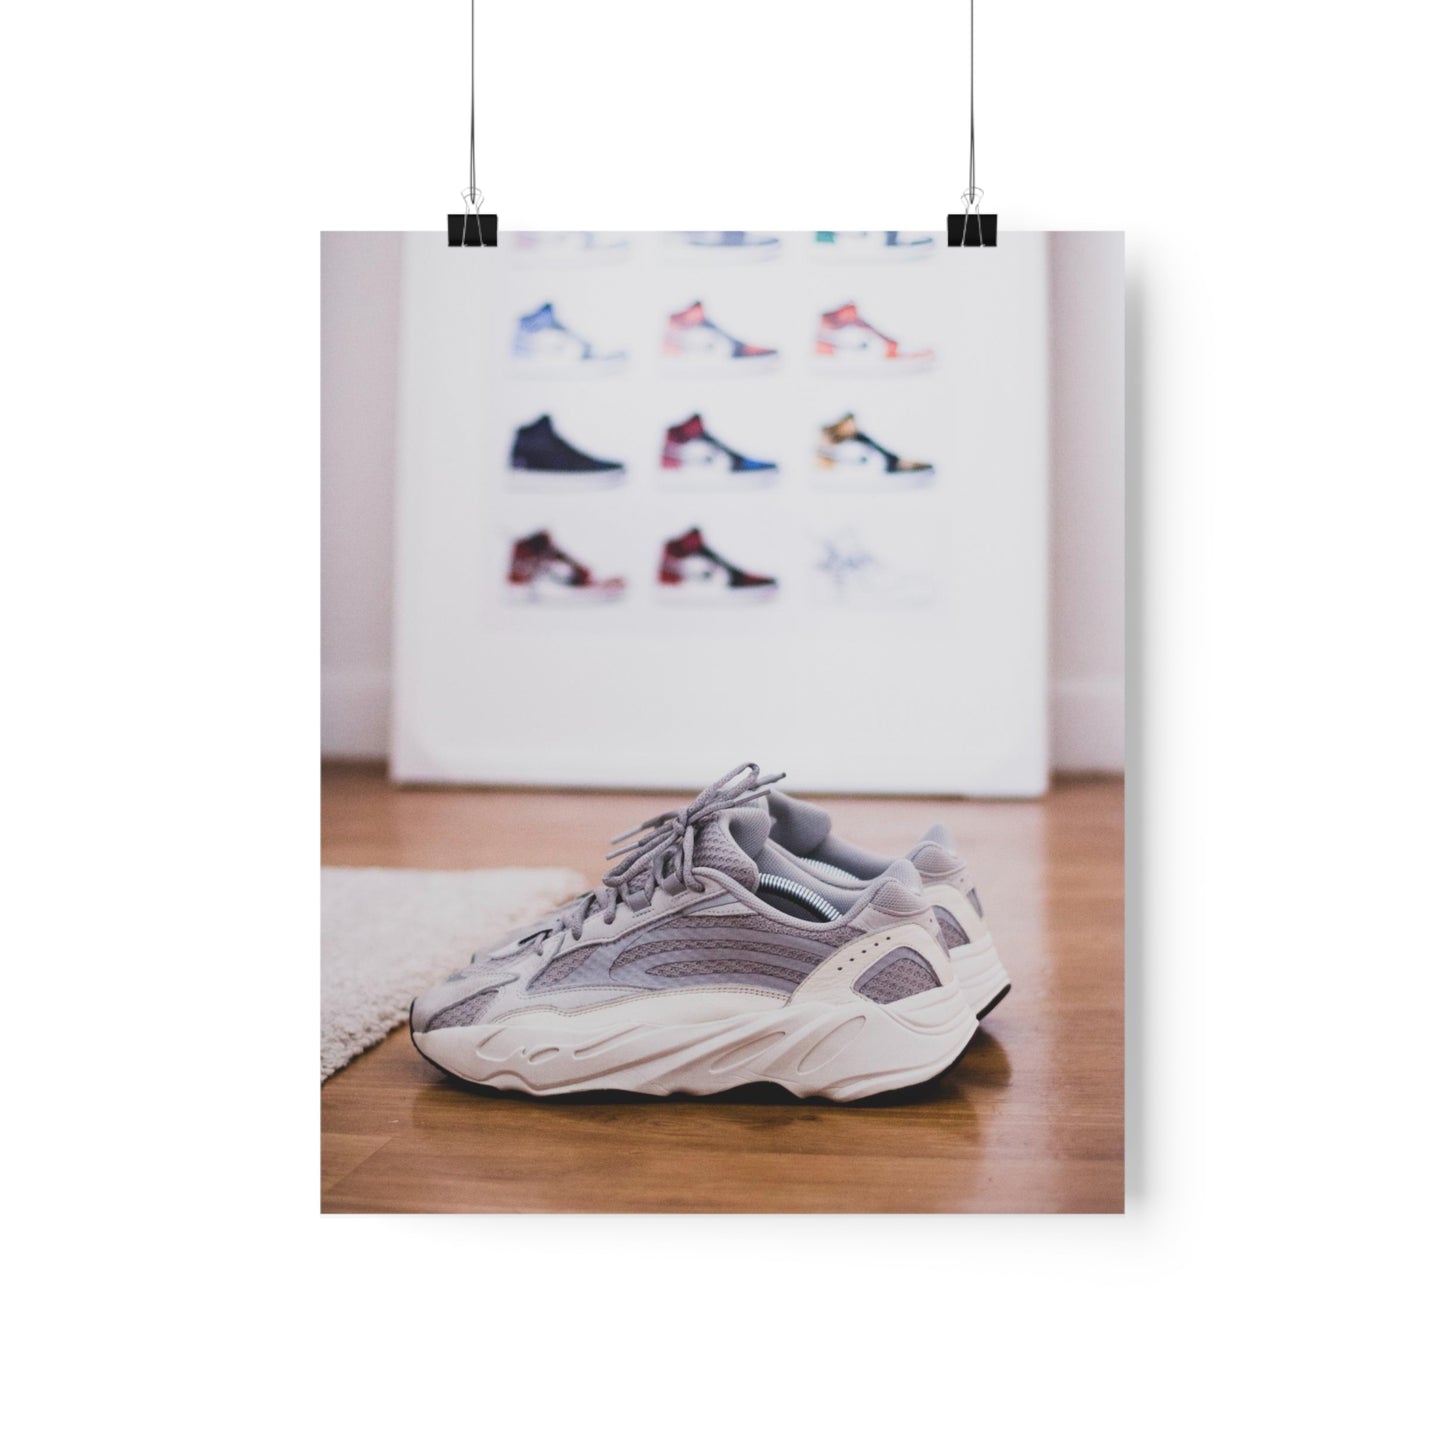 Adidas Yeezy Boost 700 V2 Static In Front Of Nike Retro 1 Art Poster